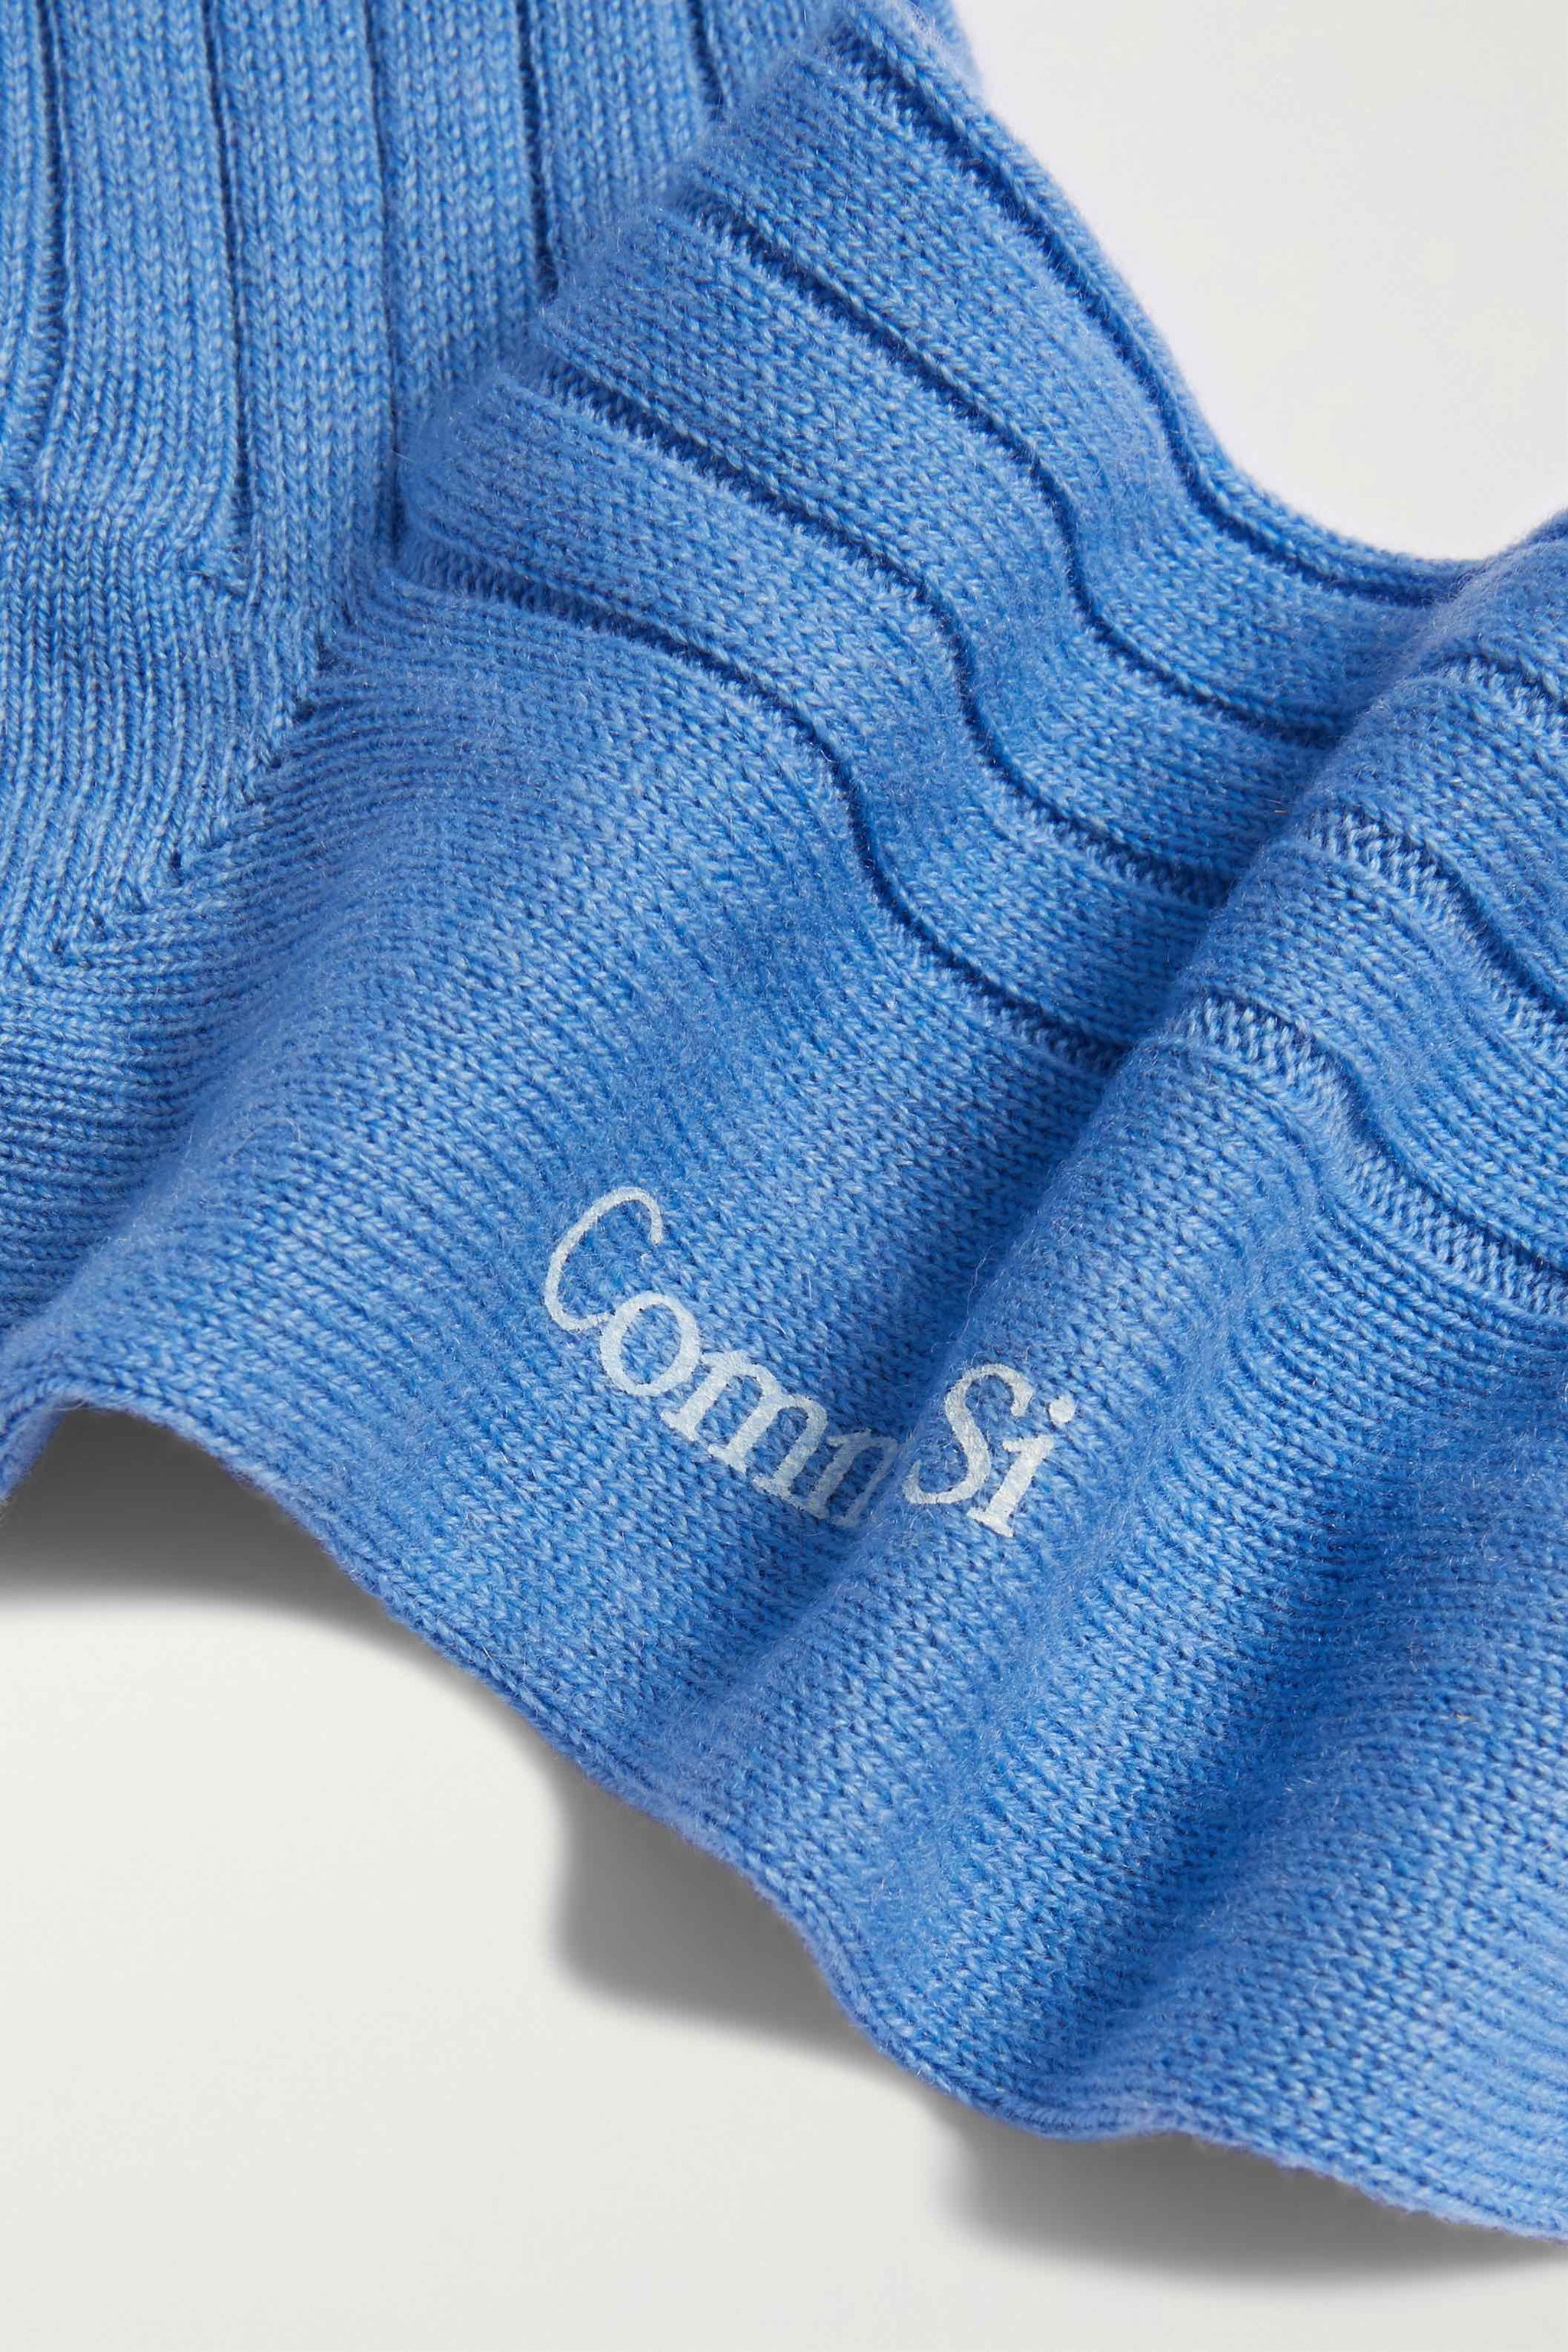 Footbed Detail, The Danielle Sock in Sky Blue, The Cashmere Trio in Buffalo, Mongolian cashmere socks, by Comme Si